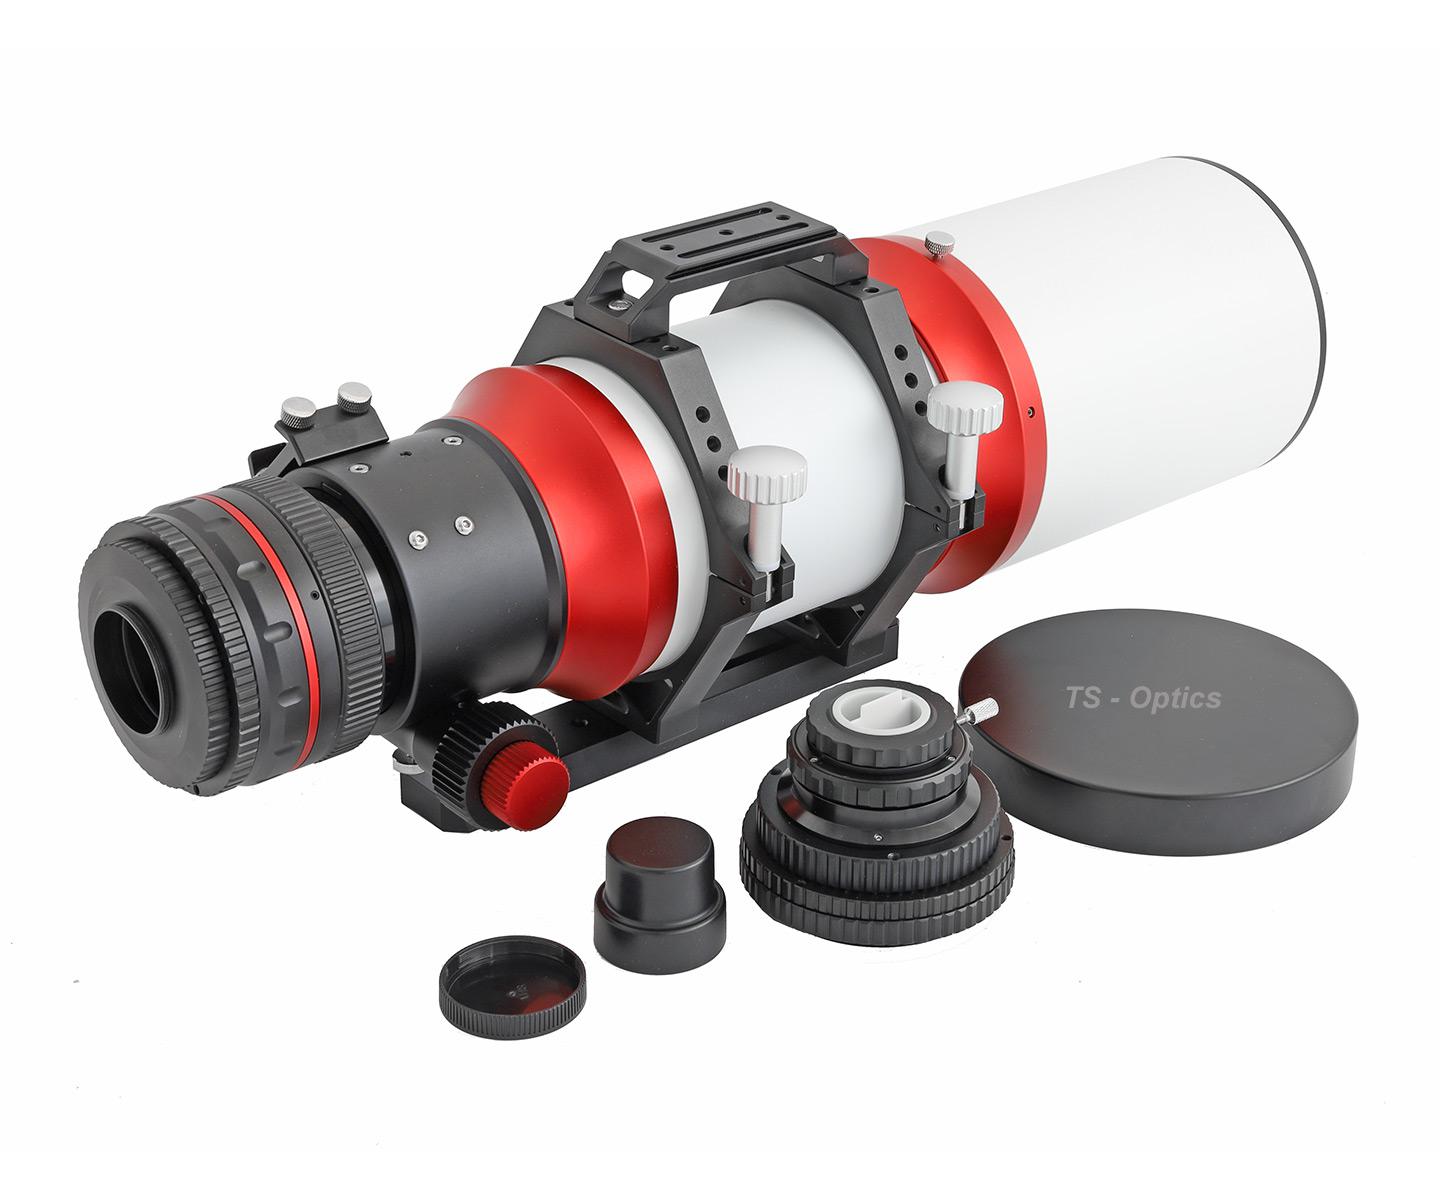  An ultimate and compact APO refractor for astrophotography and observation. [EN] 